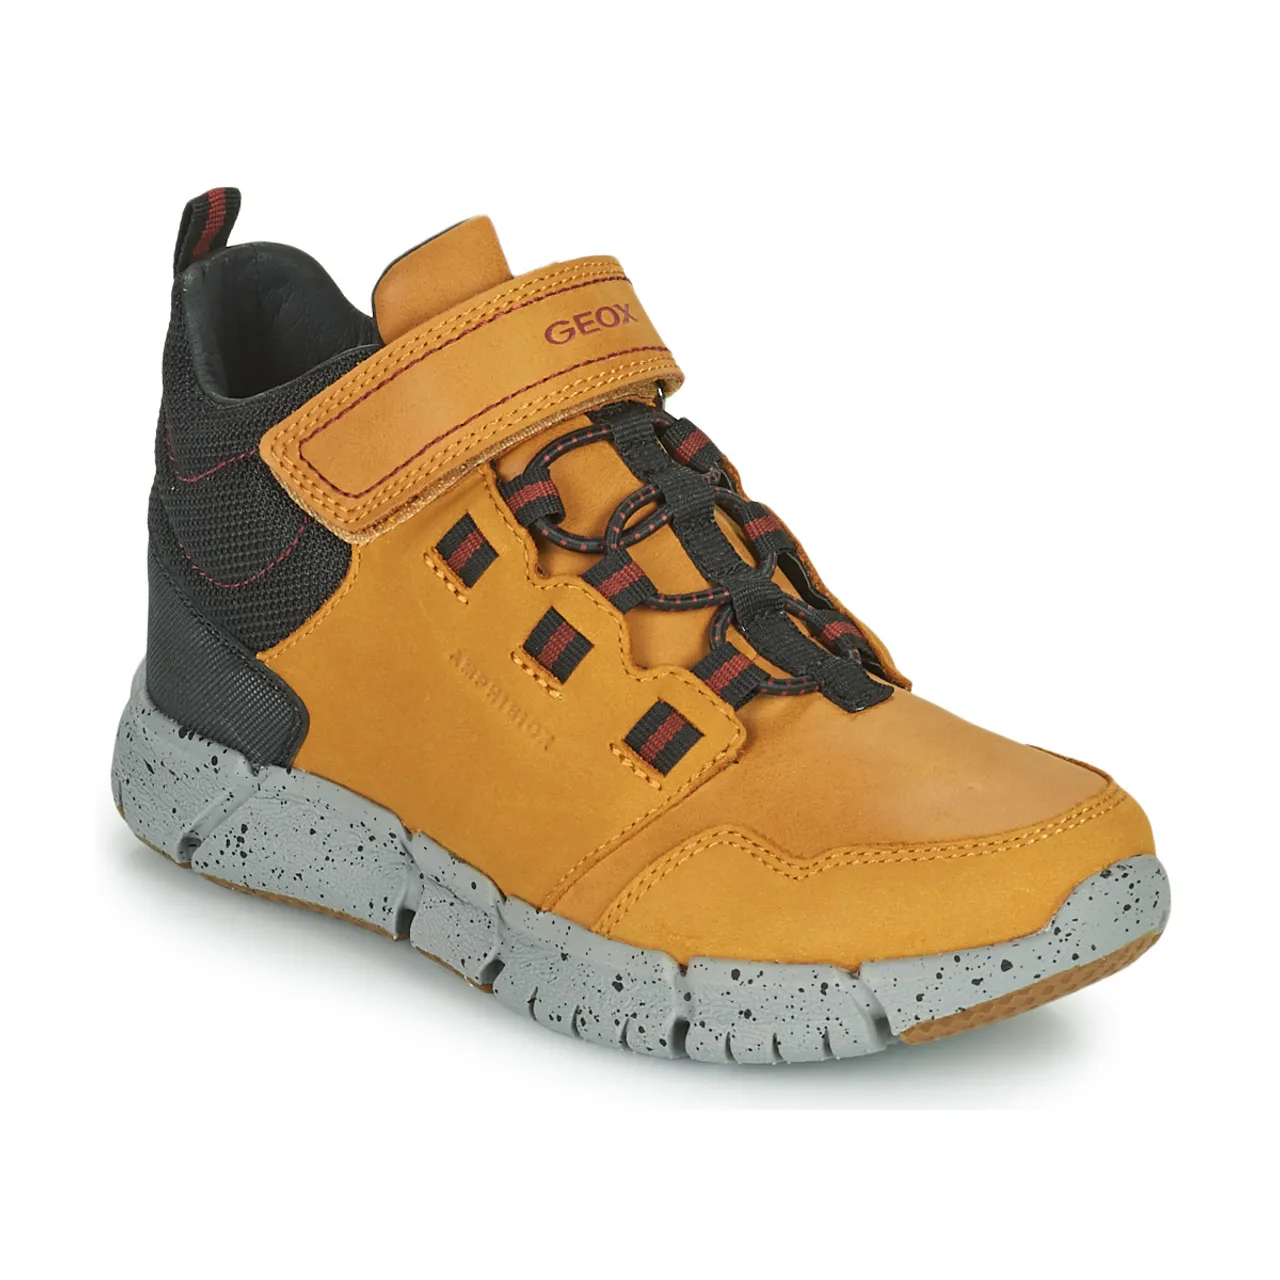 Geox  FLEXYPER ABX  boys's Children's Shoes (High-top Trainers) in Brown